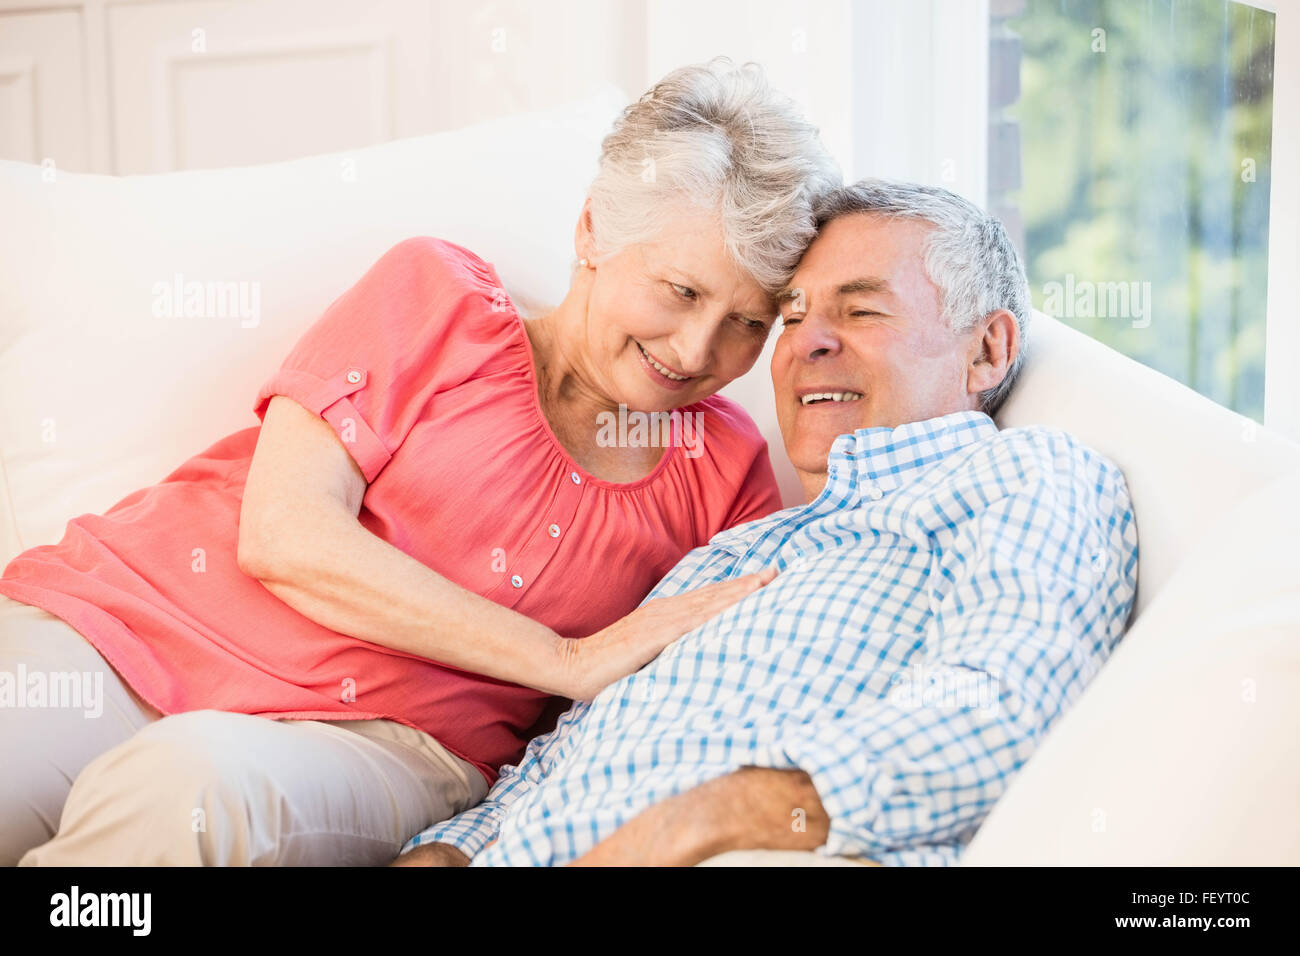 Happy senior couple lying on sofa Banque D'Images